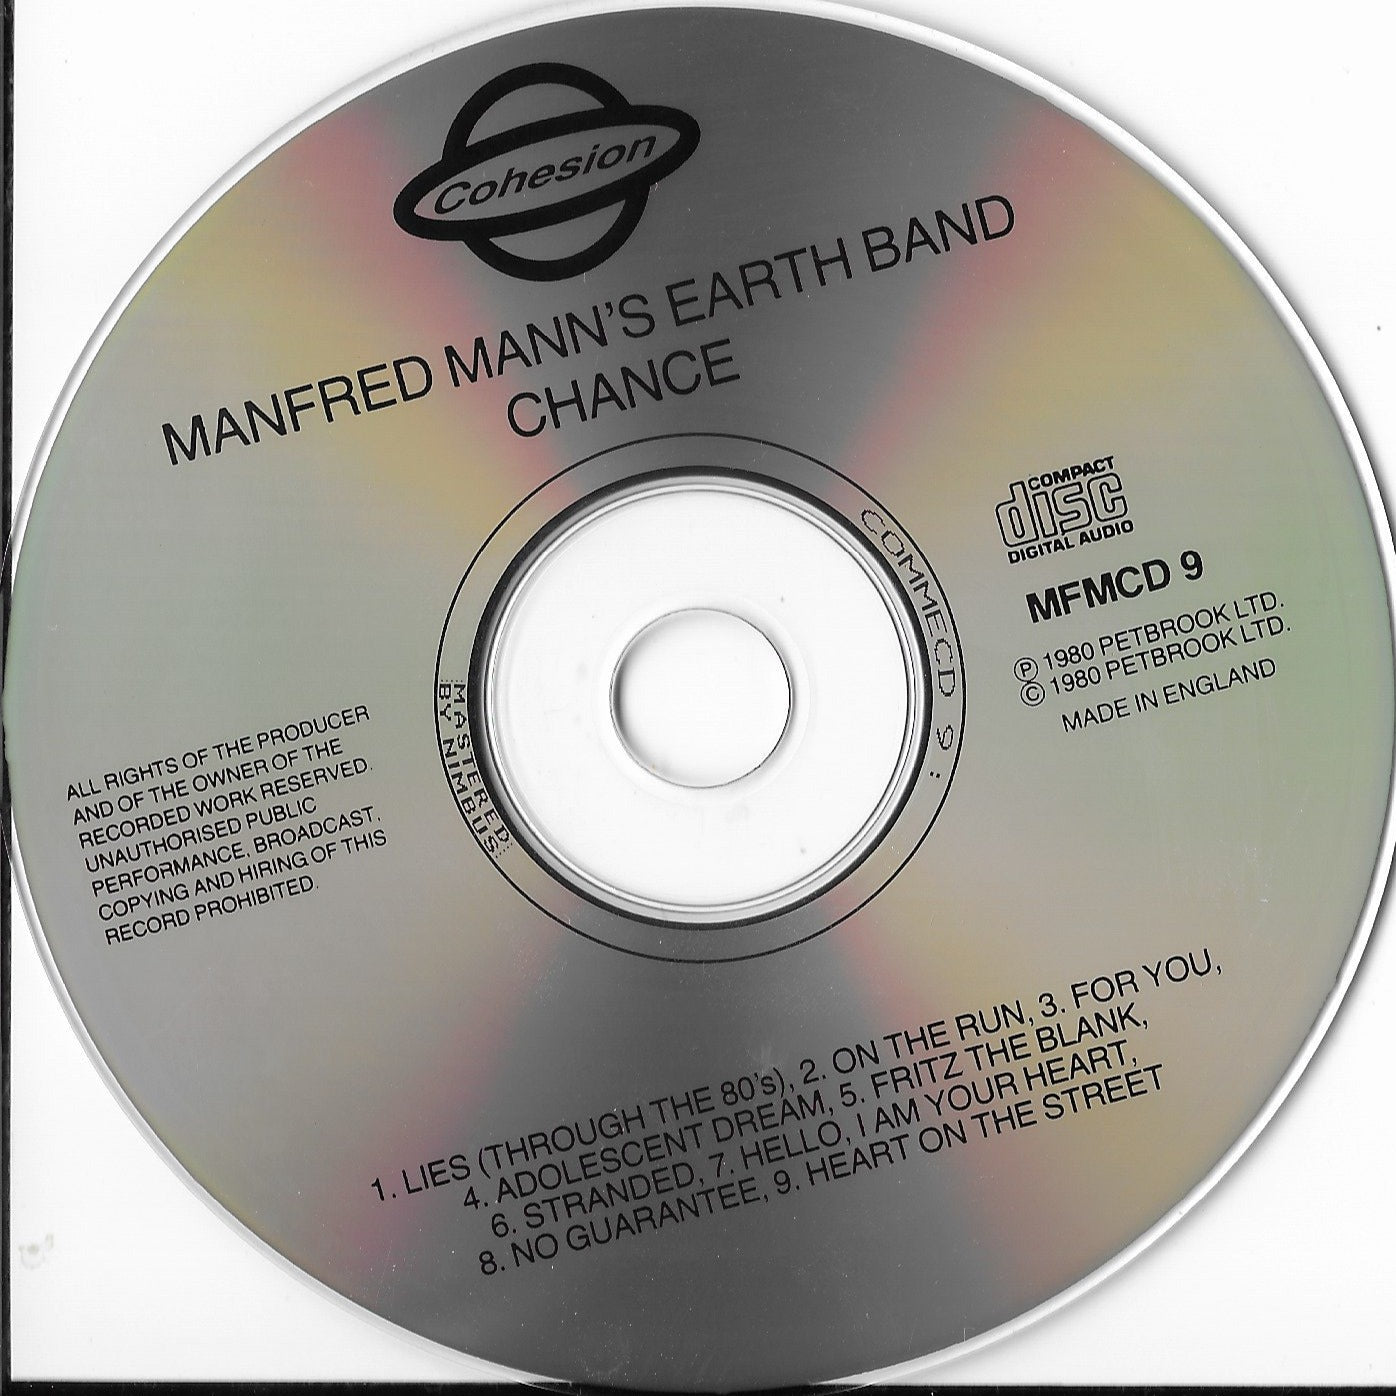 MANFRED MANN'S EARTH BAND - Chance